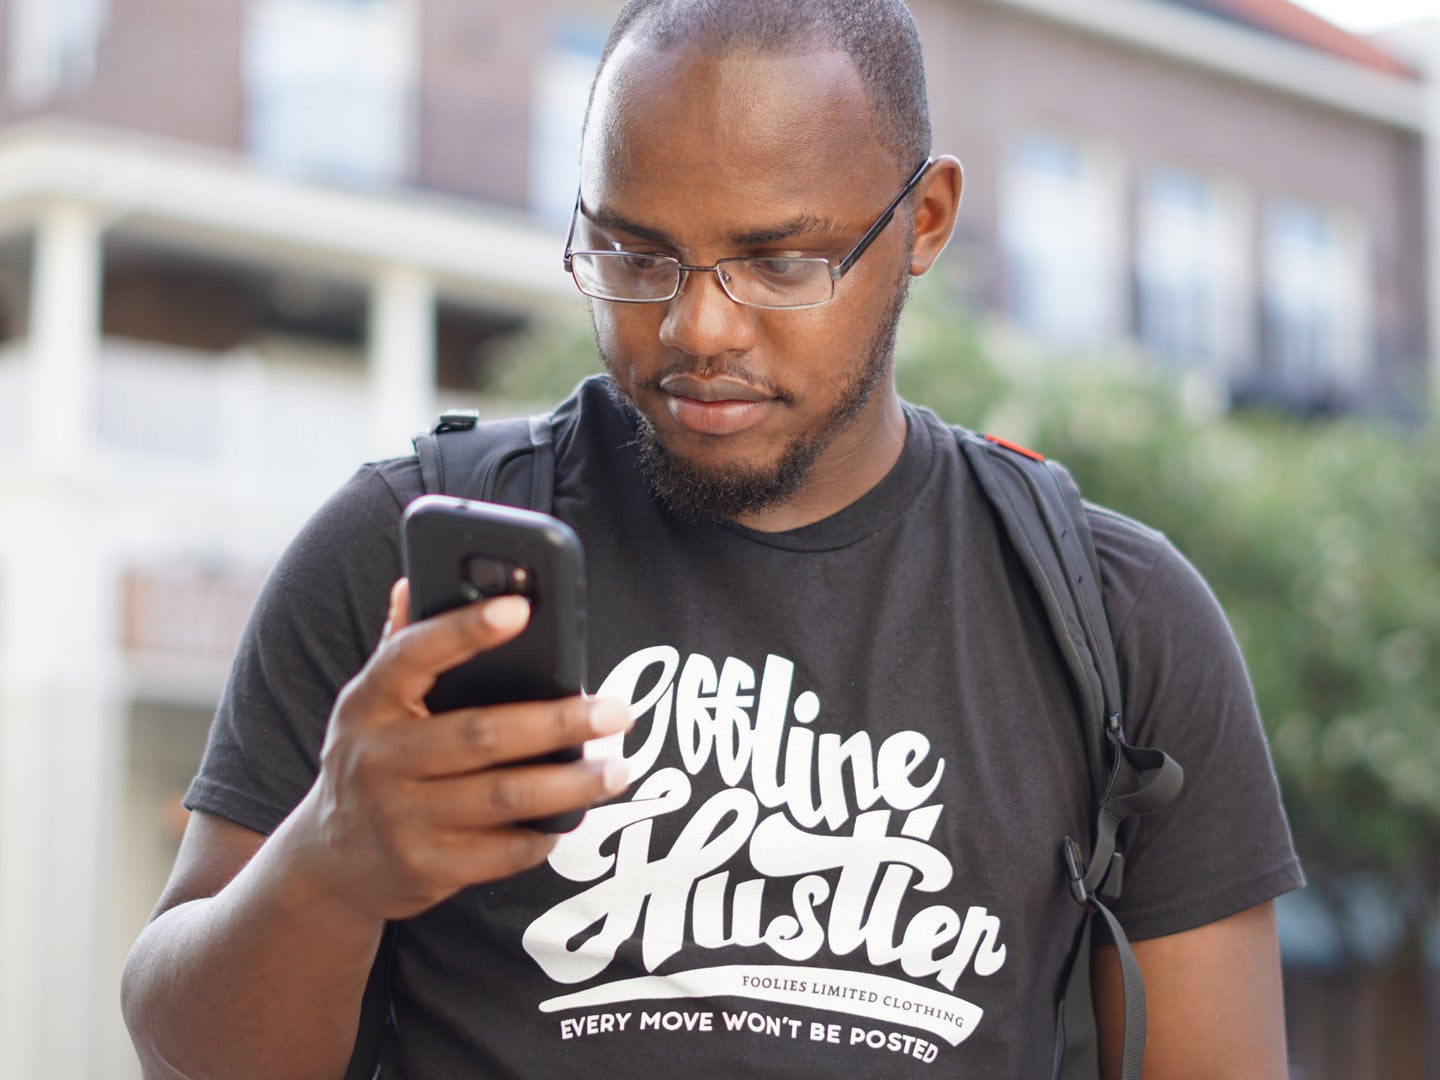 A Black man wearing a t-shirt, a backpack, and glasses, looking annoyed at a spam call on his cell phone.